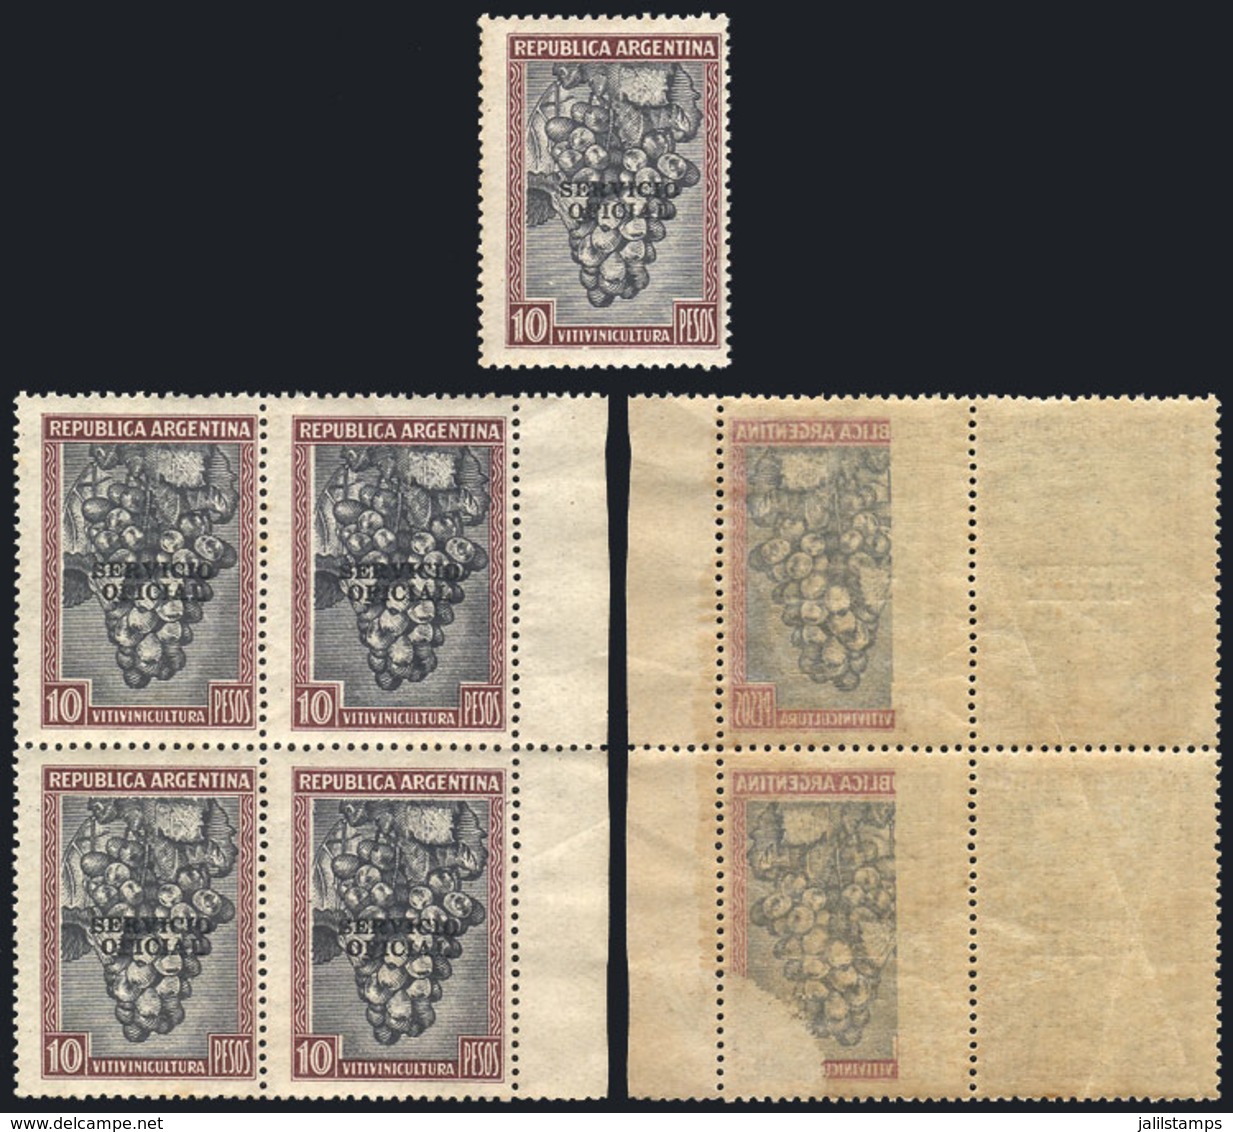 ARGENTINA: GJ.669, 10P. Grapes, Block Of 4 With Varieties: Double Impression Of Black Center And Notable Offset Impressi - Officials